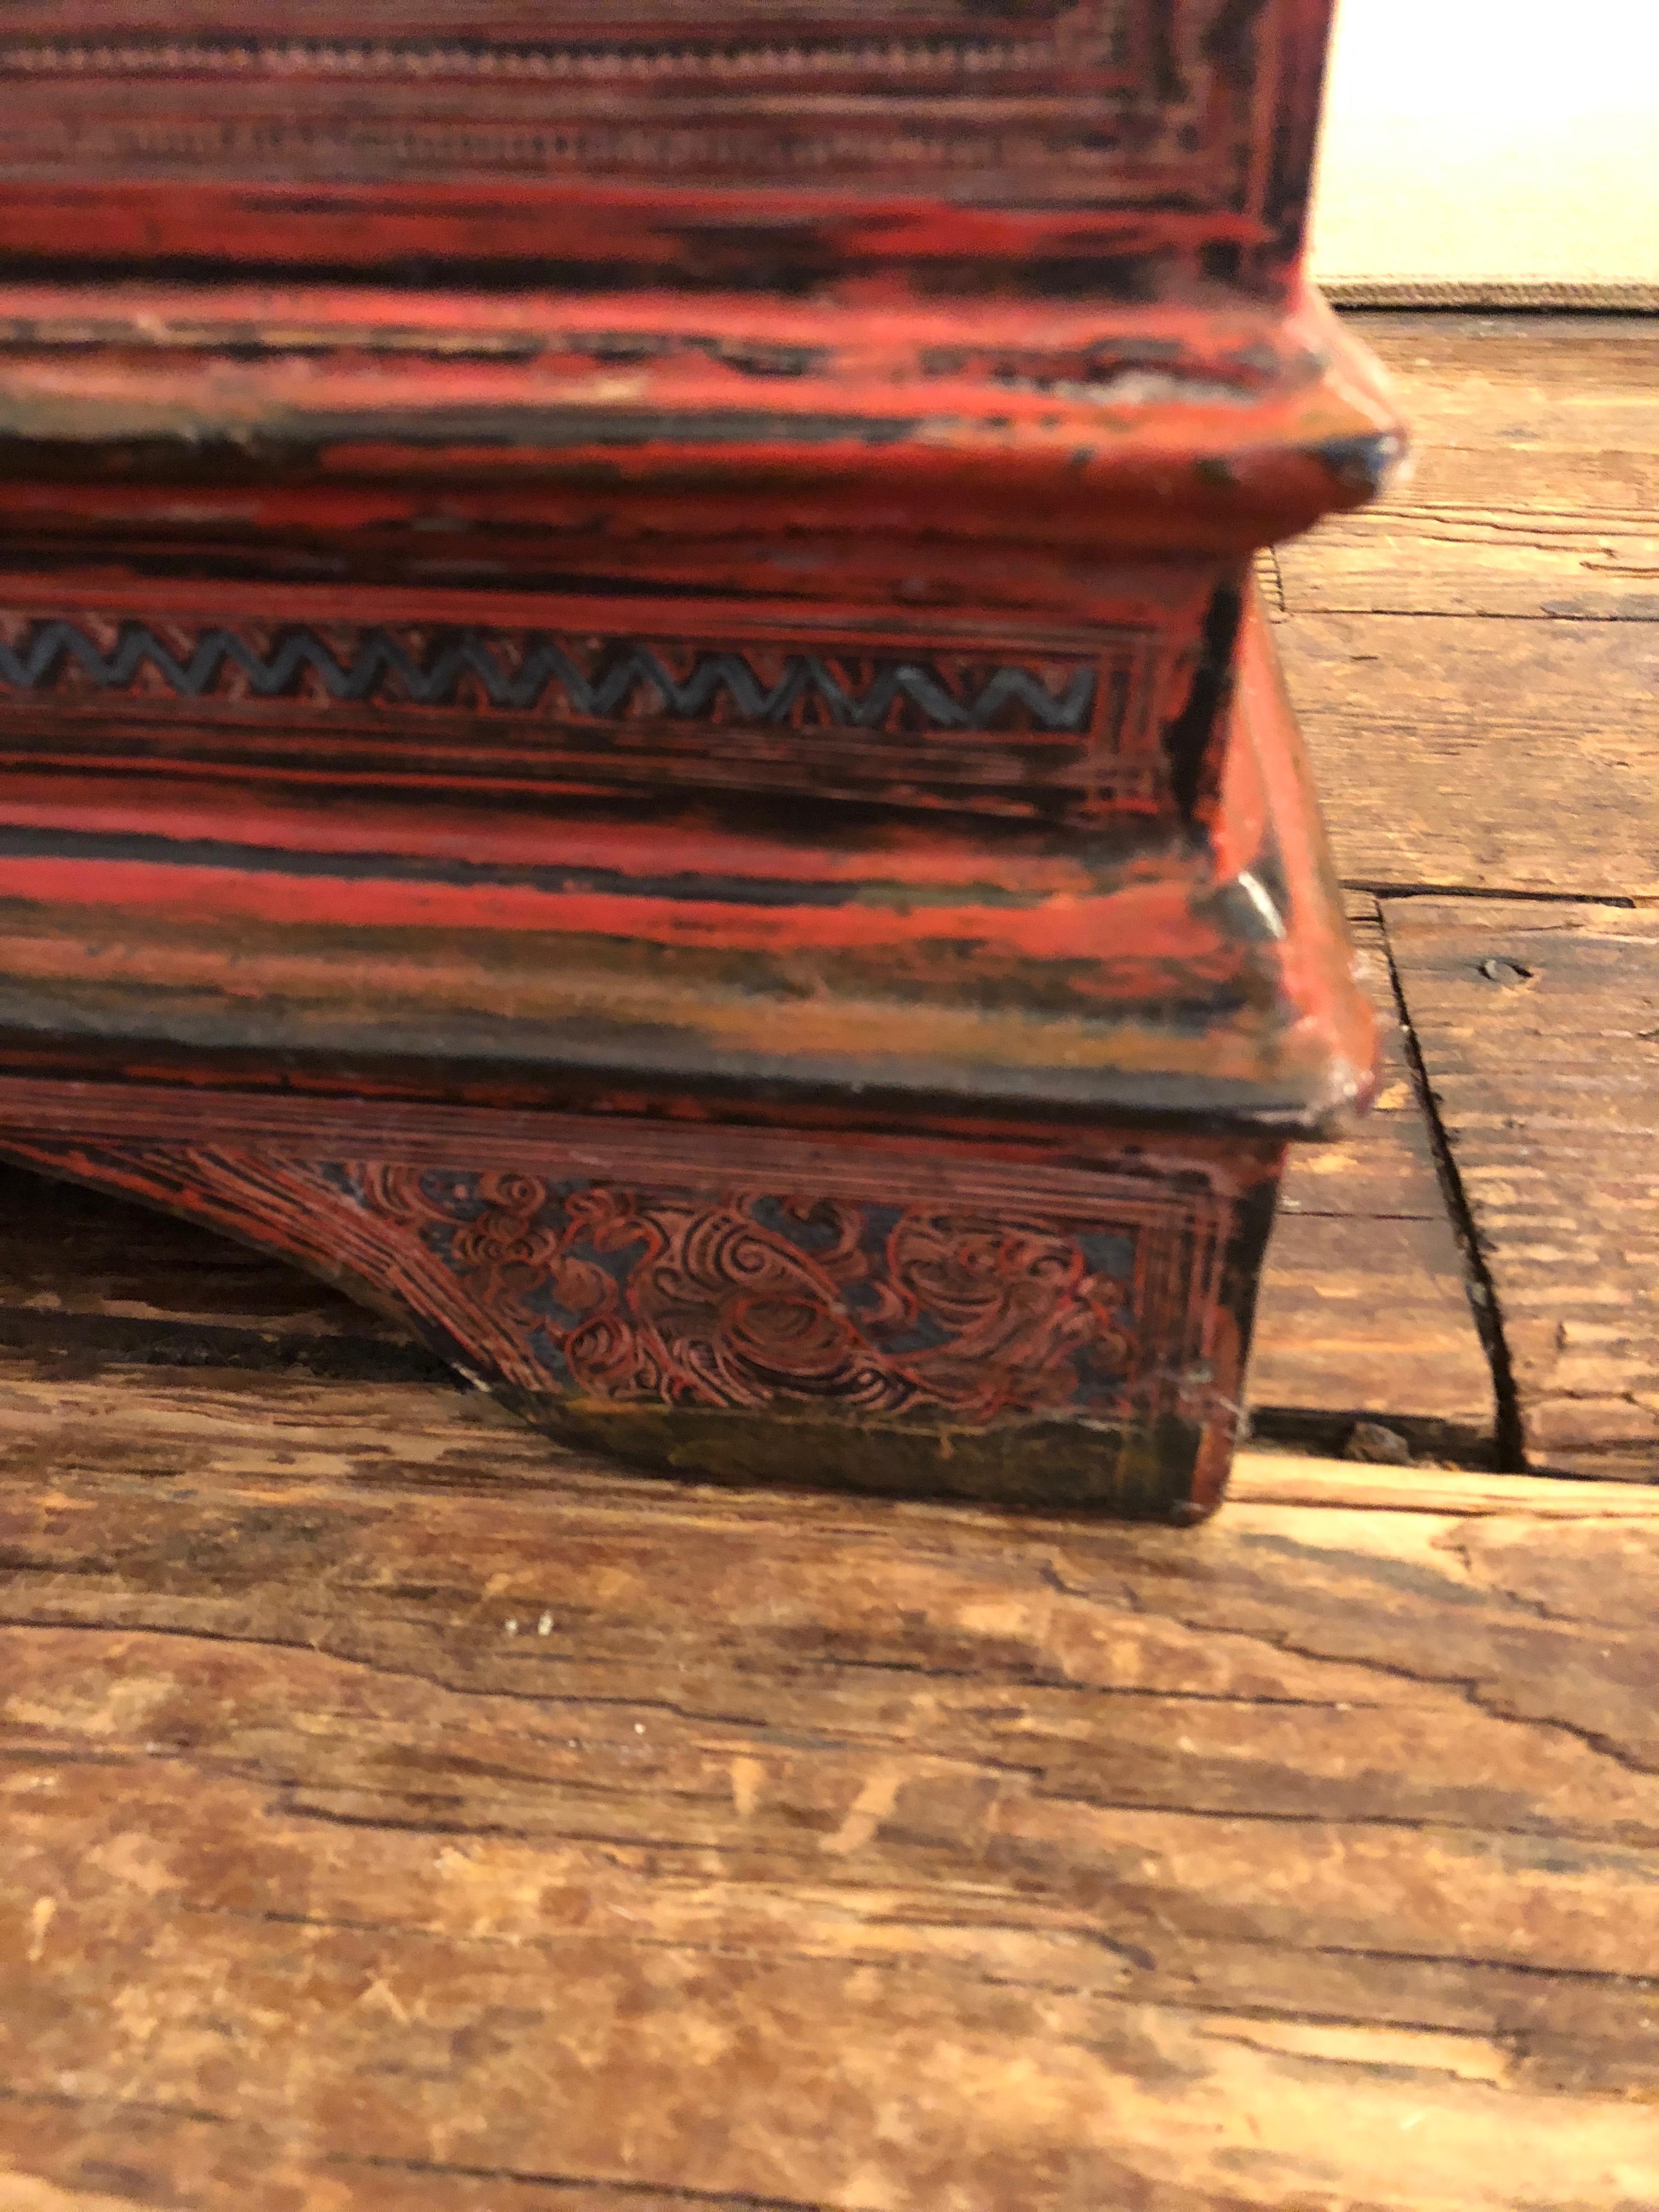 If objects could talk, this box would have some interesting stories for all its wonderful aged patina, cracks and character. A faded cinnabar, the entire surface is meticulously hand painted, and inside there's a fitted top compartment that lifts